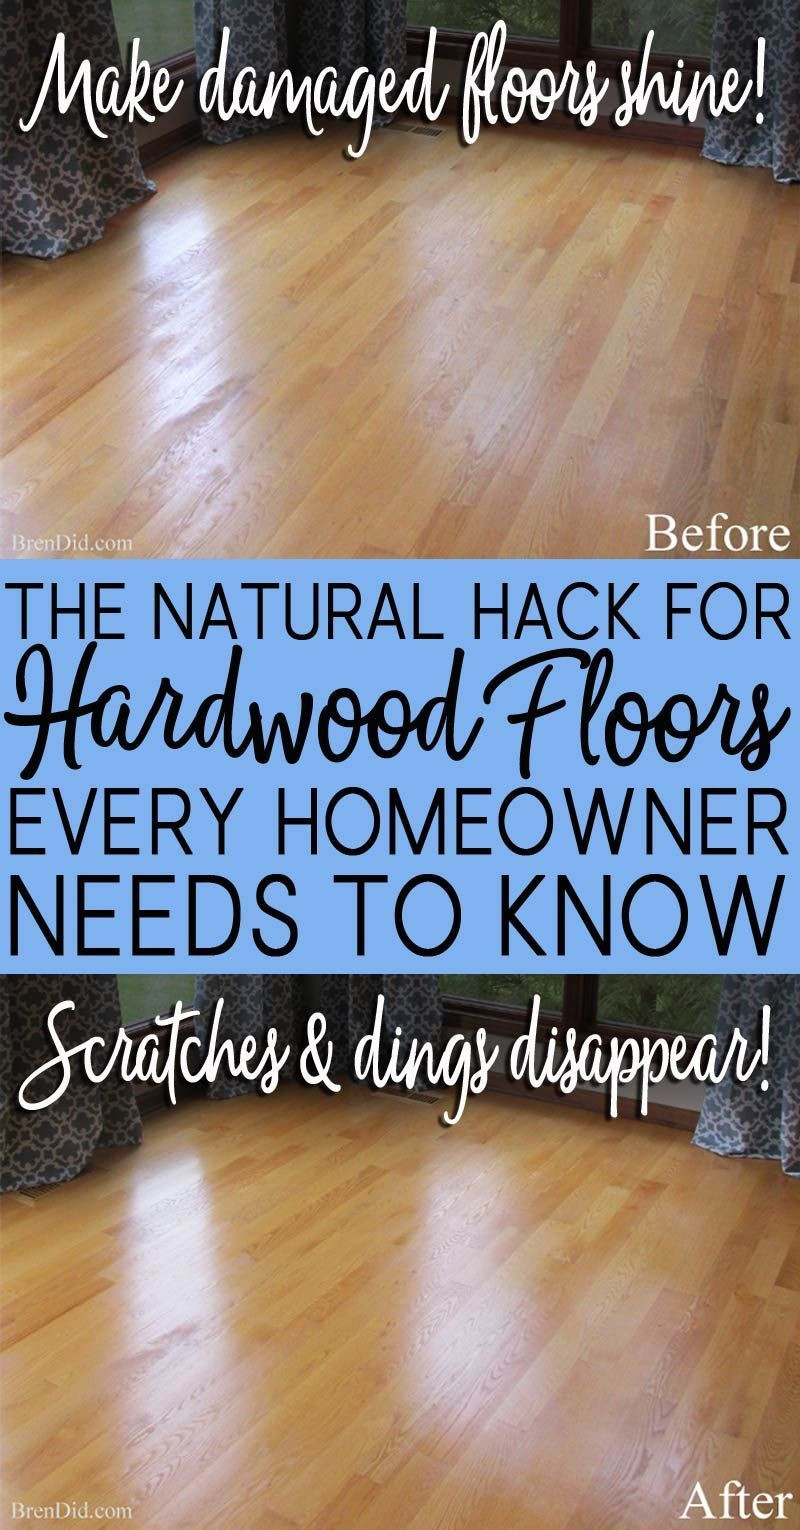 13 Great How to Refinish Hardwood Floors with Pet Stains 2024 free download how to refinish hardwood floors with pet stains of 40 best flooring for pet urine ideas in the natural hack for restoring hardwood floors pinterest concept of best flooring for pet urine of